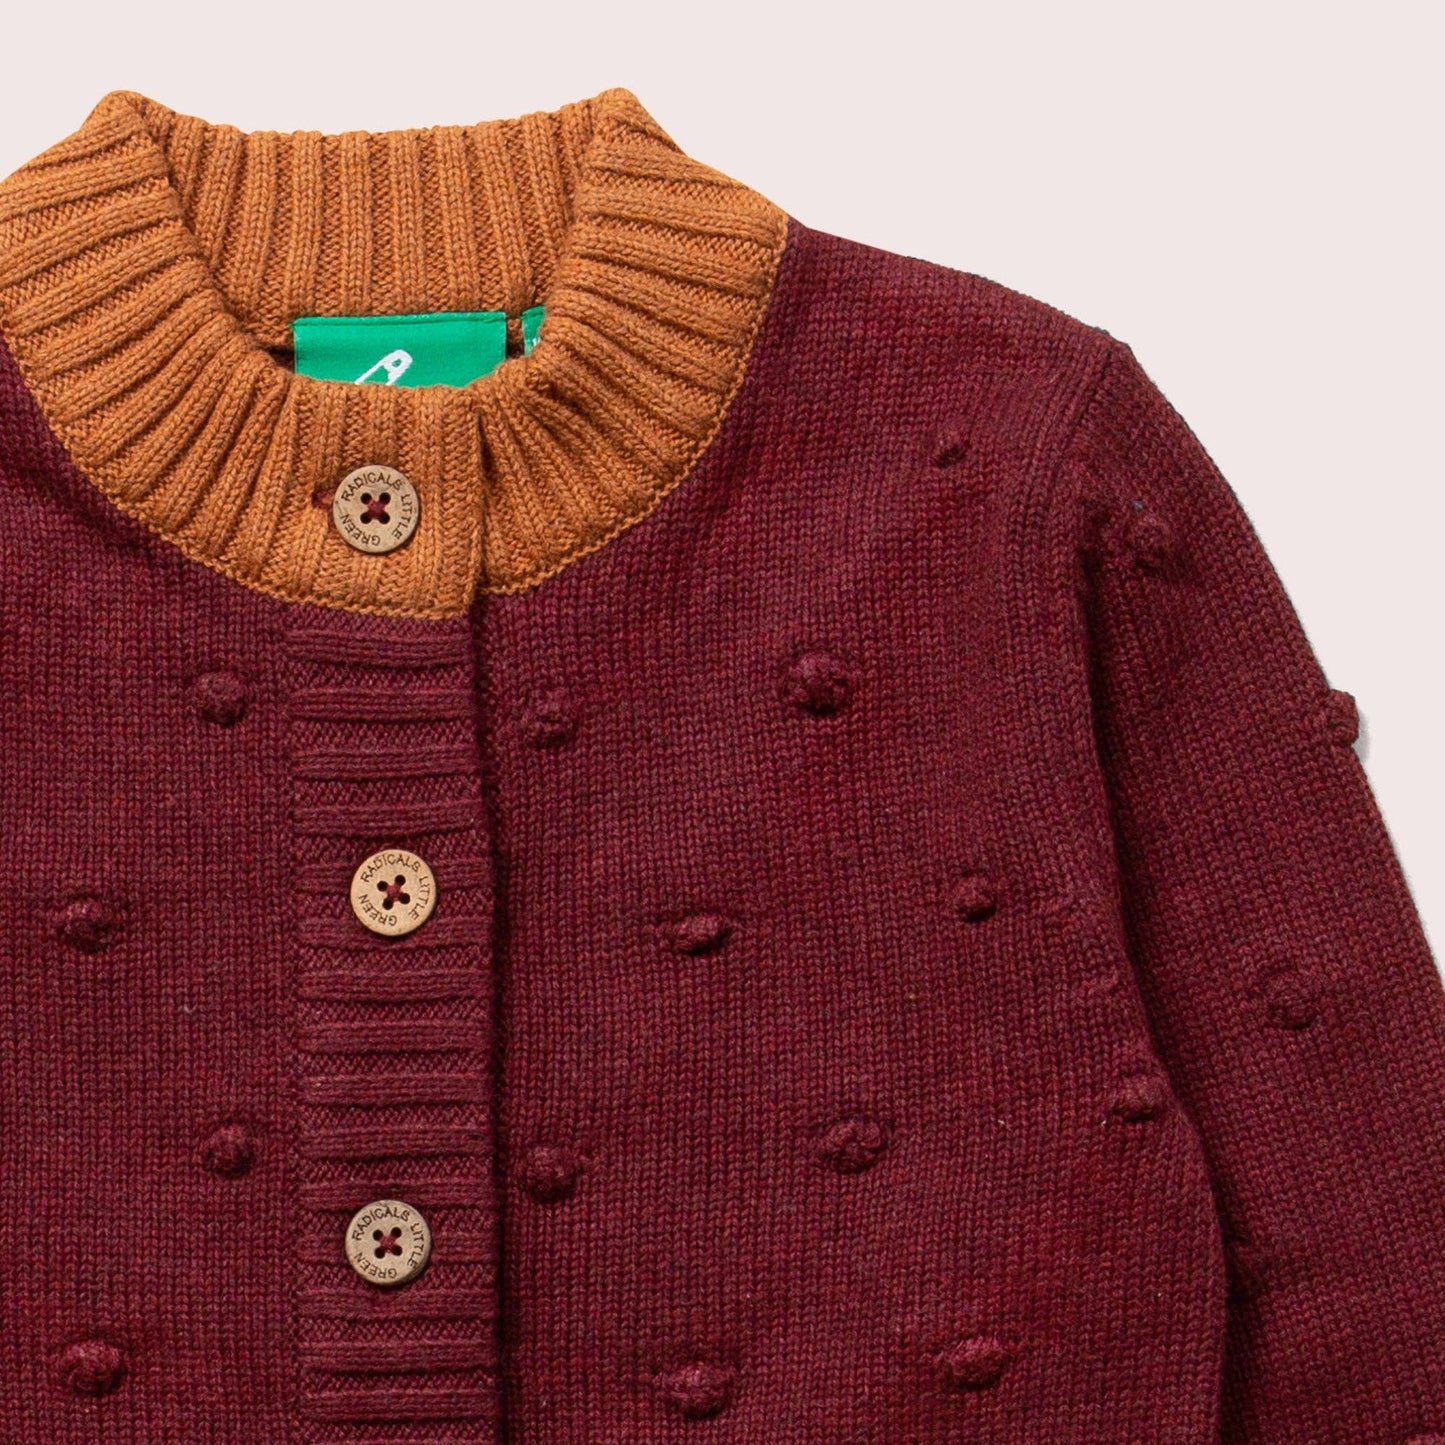 Knitted Cardigan - Berry Popcorn